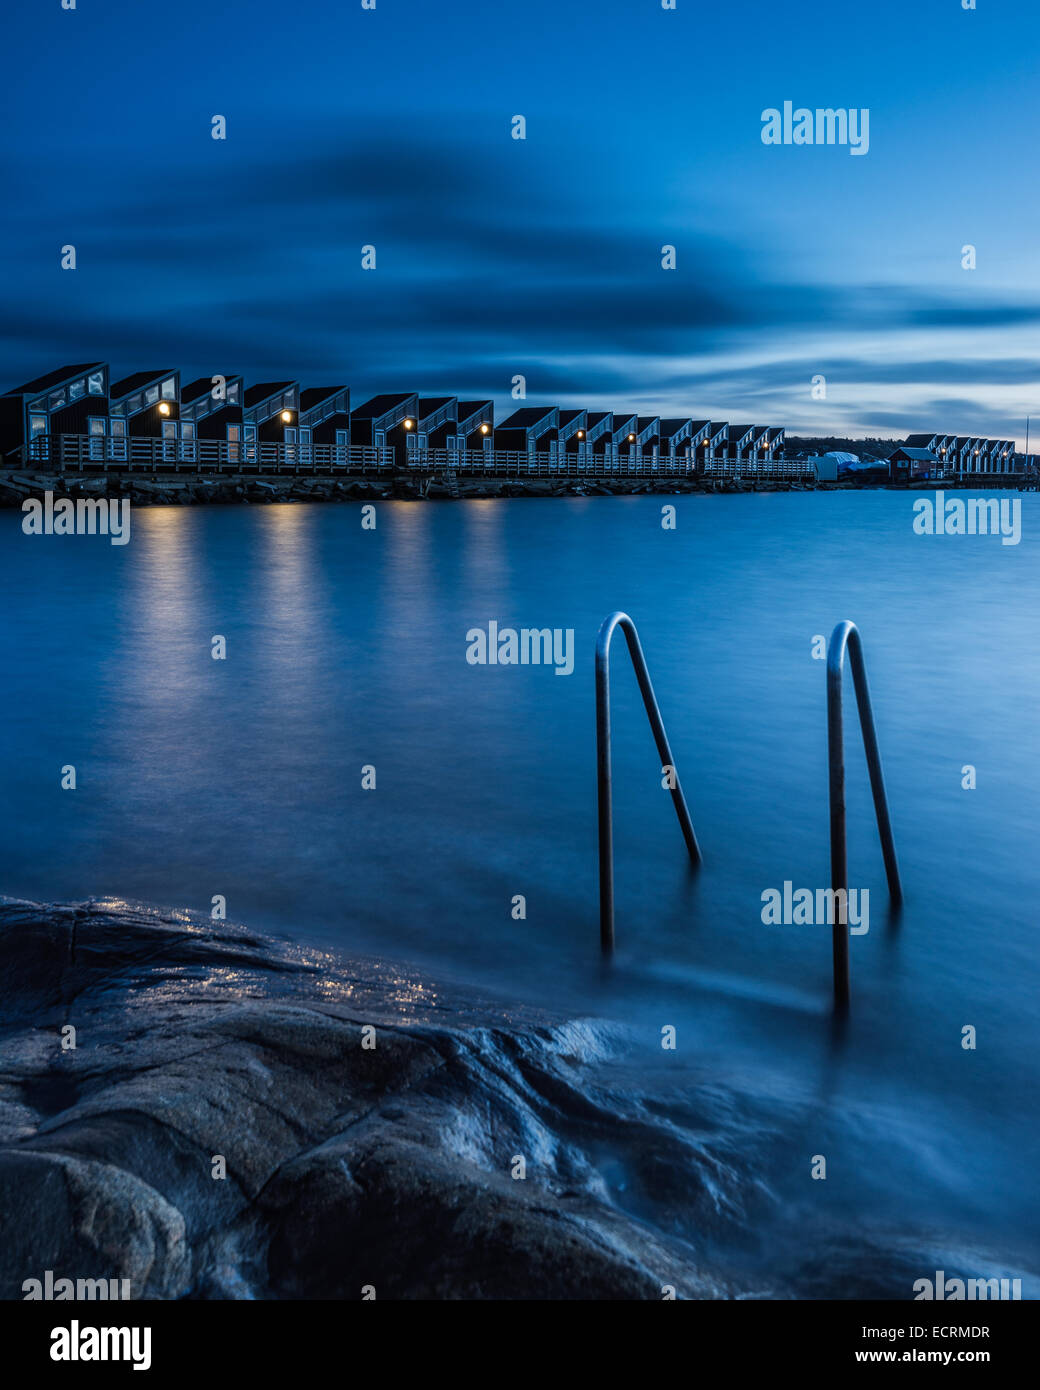 Ladder in the water and a row of shelters along the coast at night Stock Photo